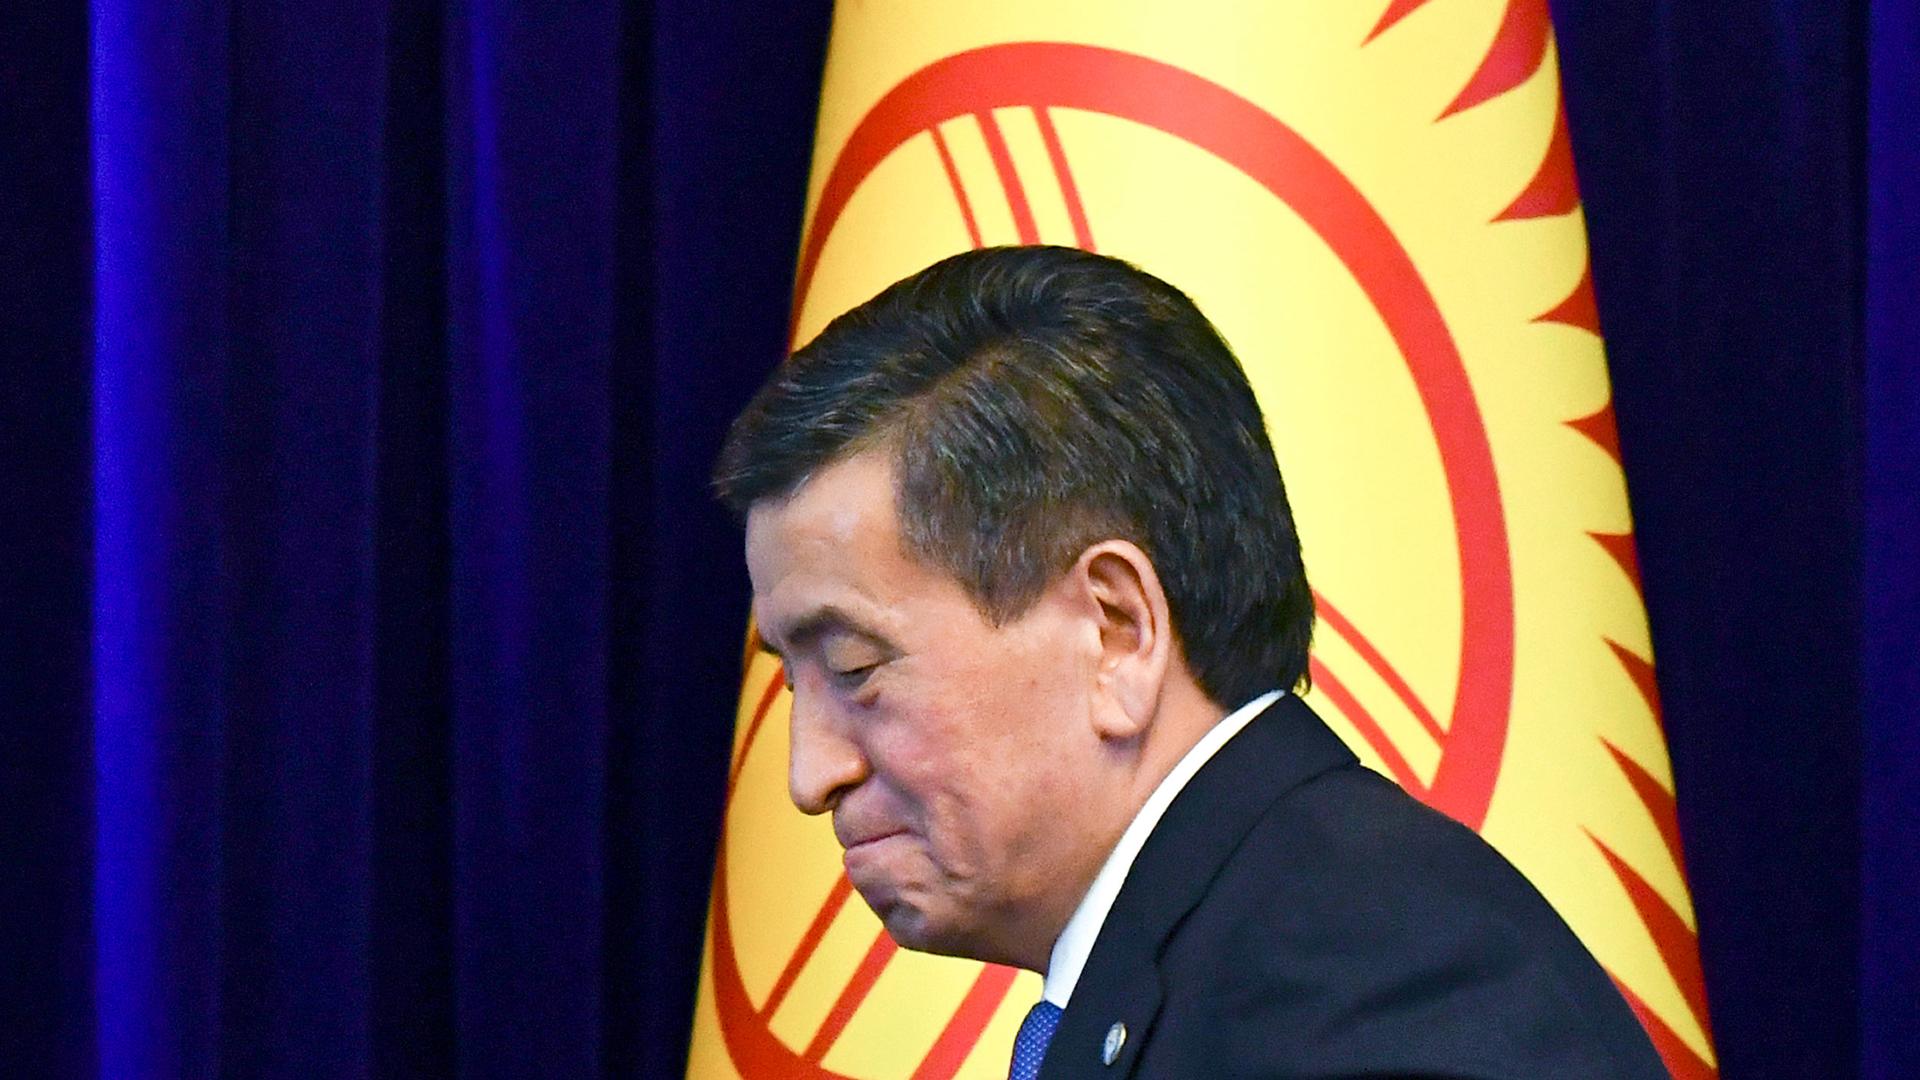 Sooronbay Jeenbekov is shown walking past the blue, yellow and red national flag.